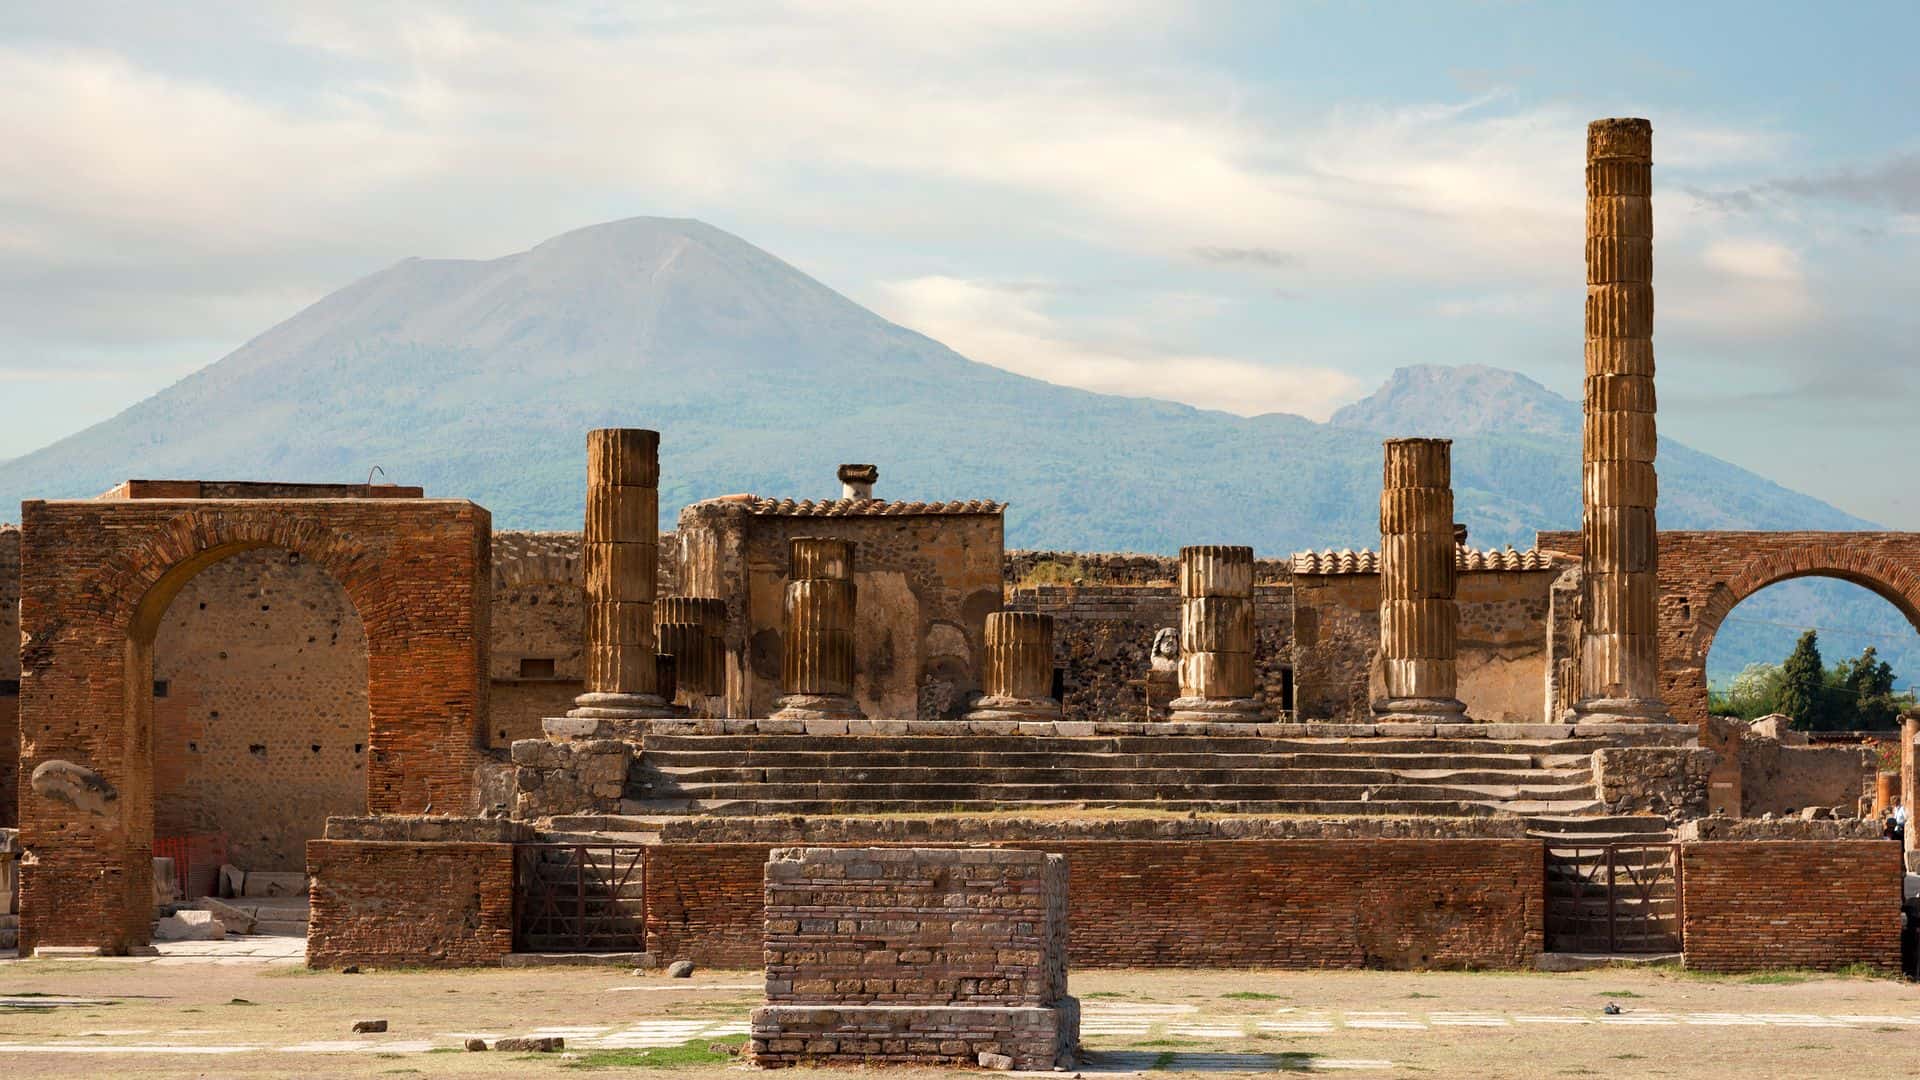 A view of the ruins of Pompeii against the backdrop of Vesuvius.